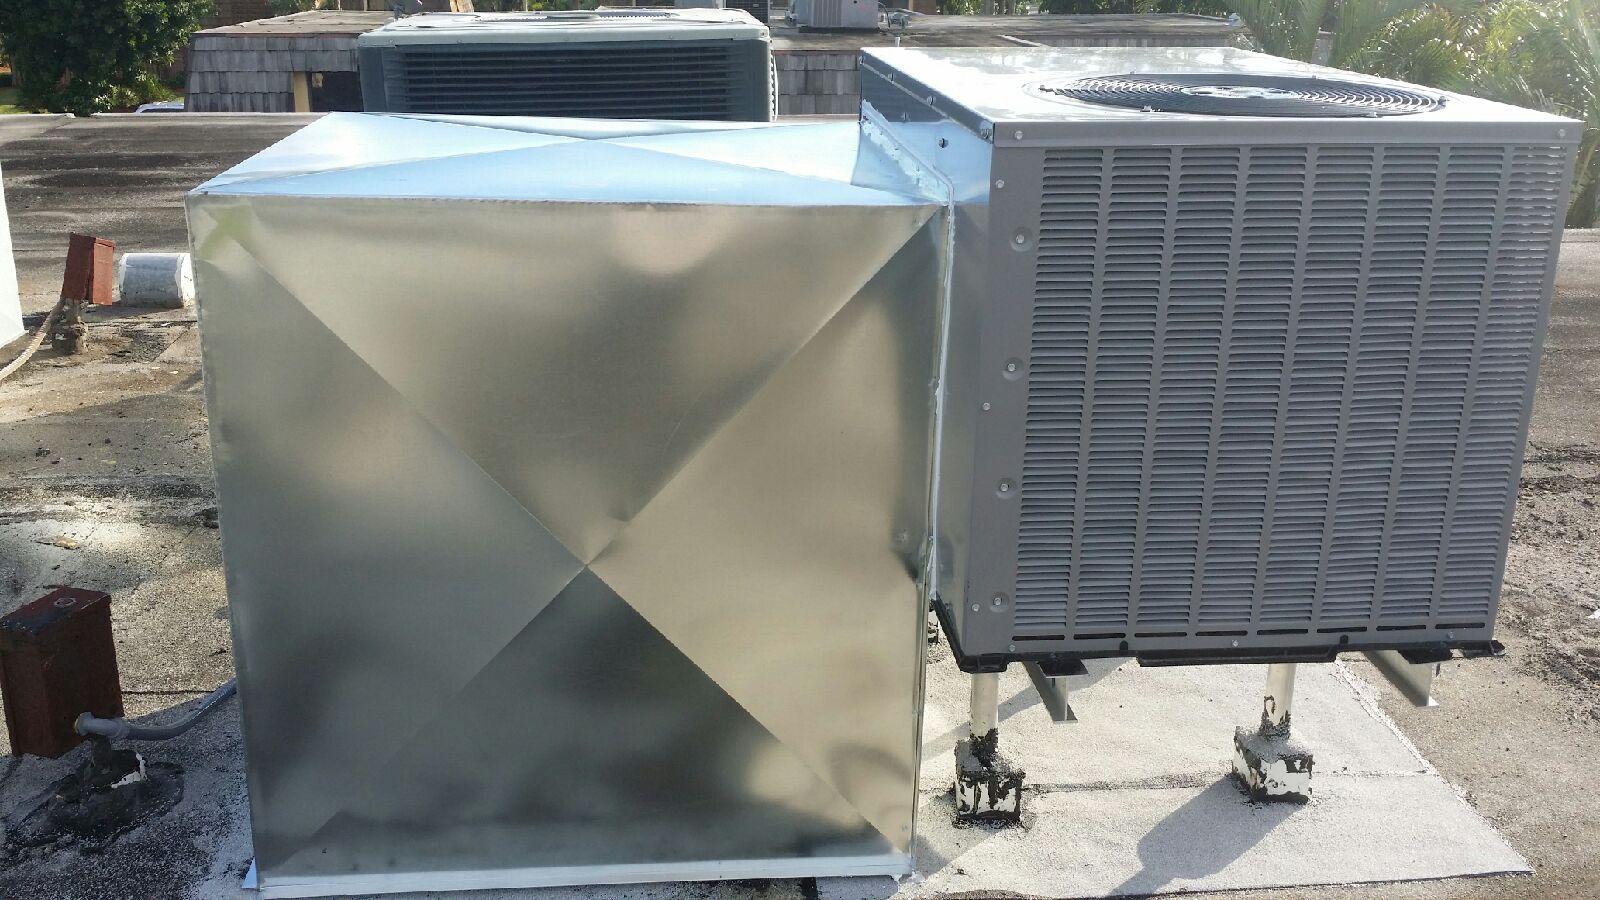 Commercial roof top air conditioner installation.